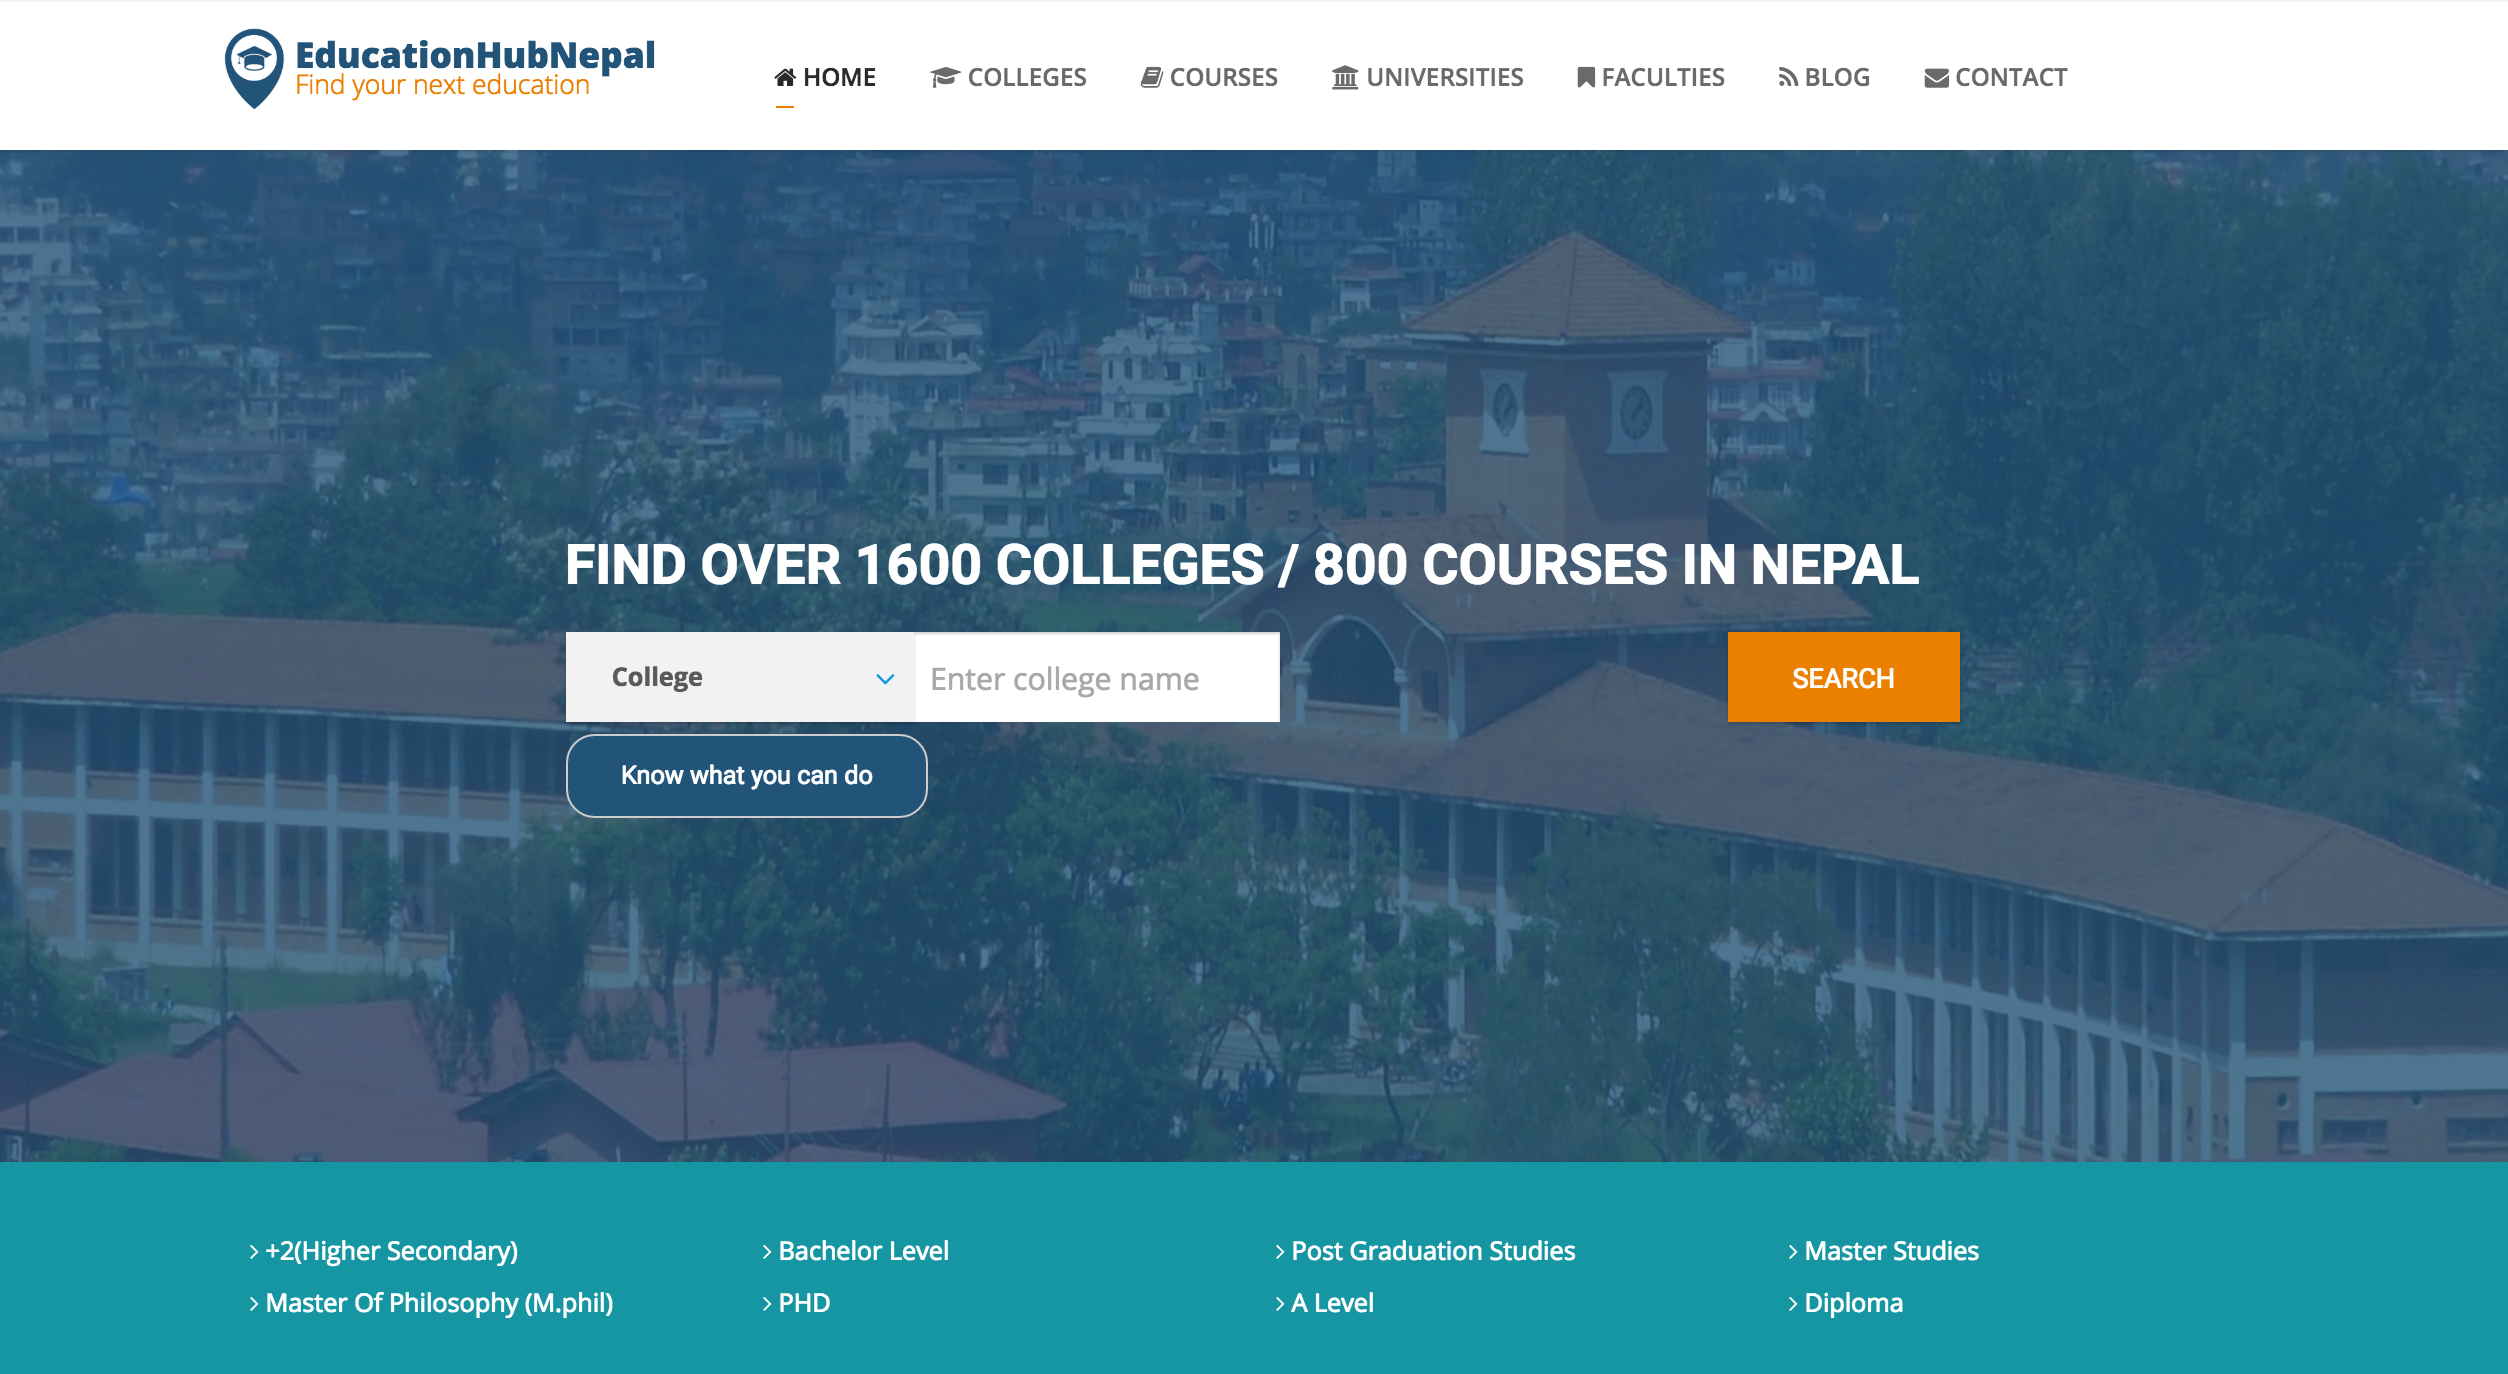 This Startup aims to build The College Wikipedia of Nepal